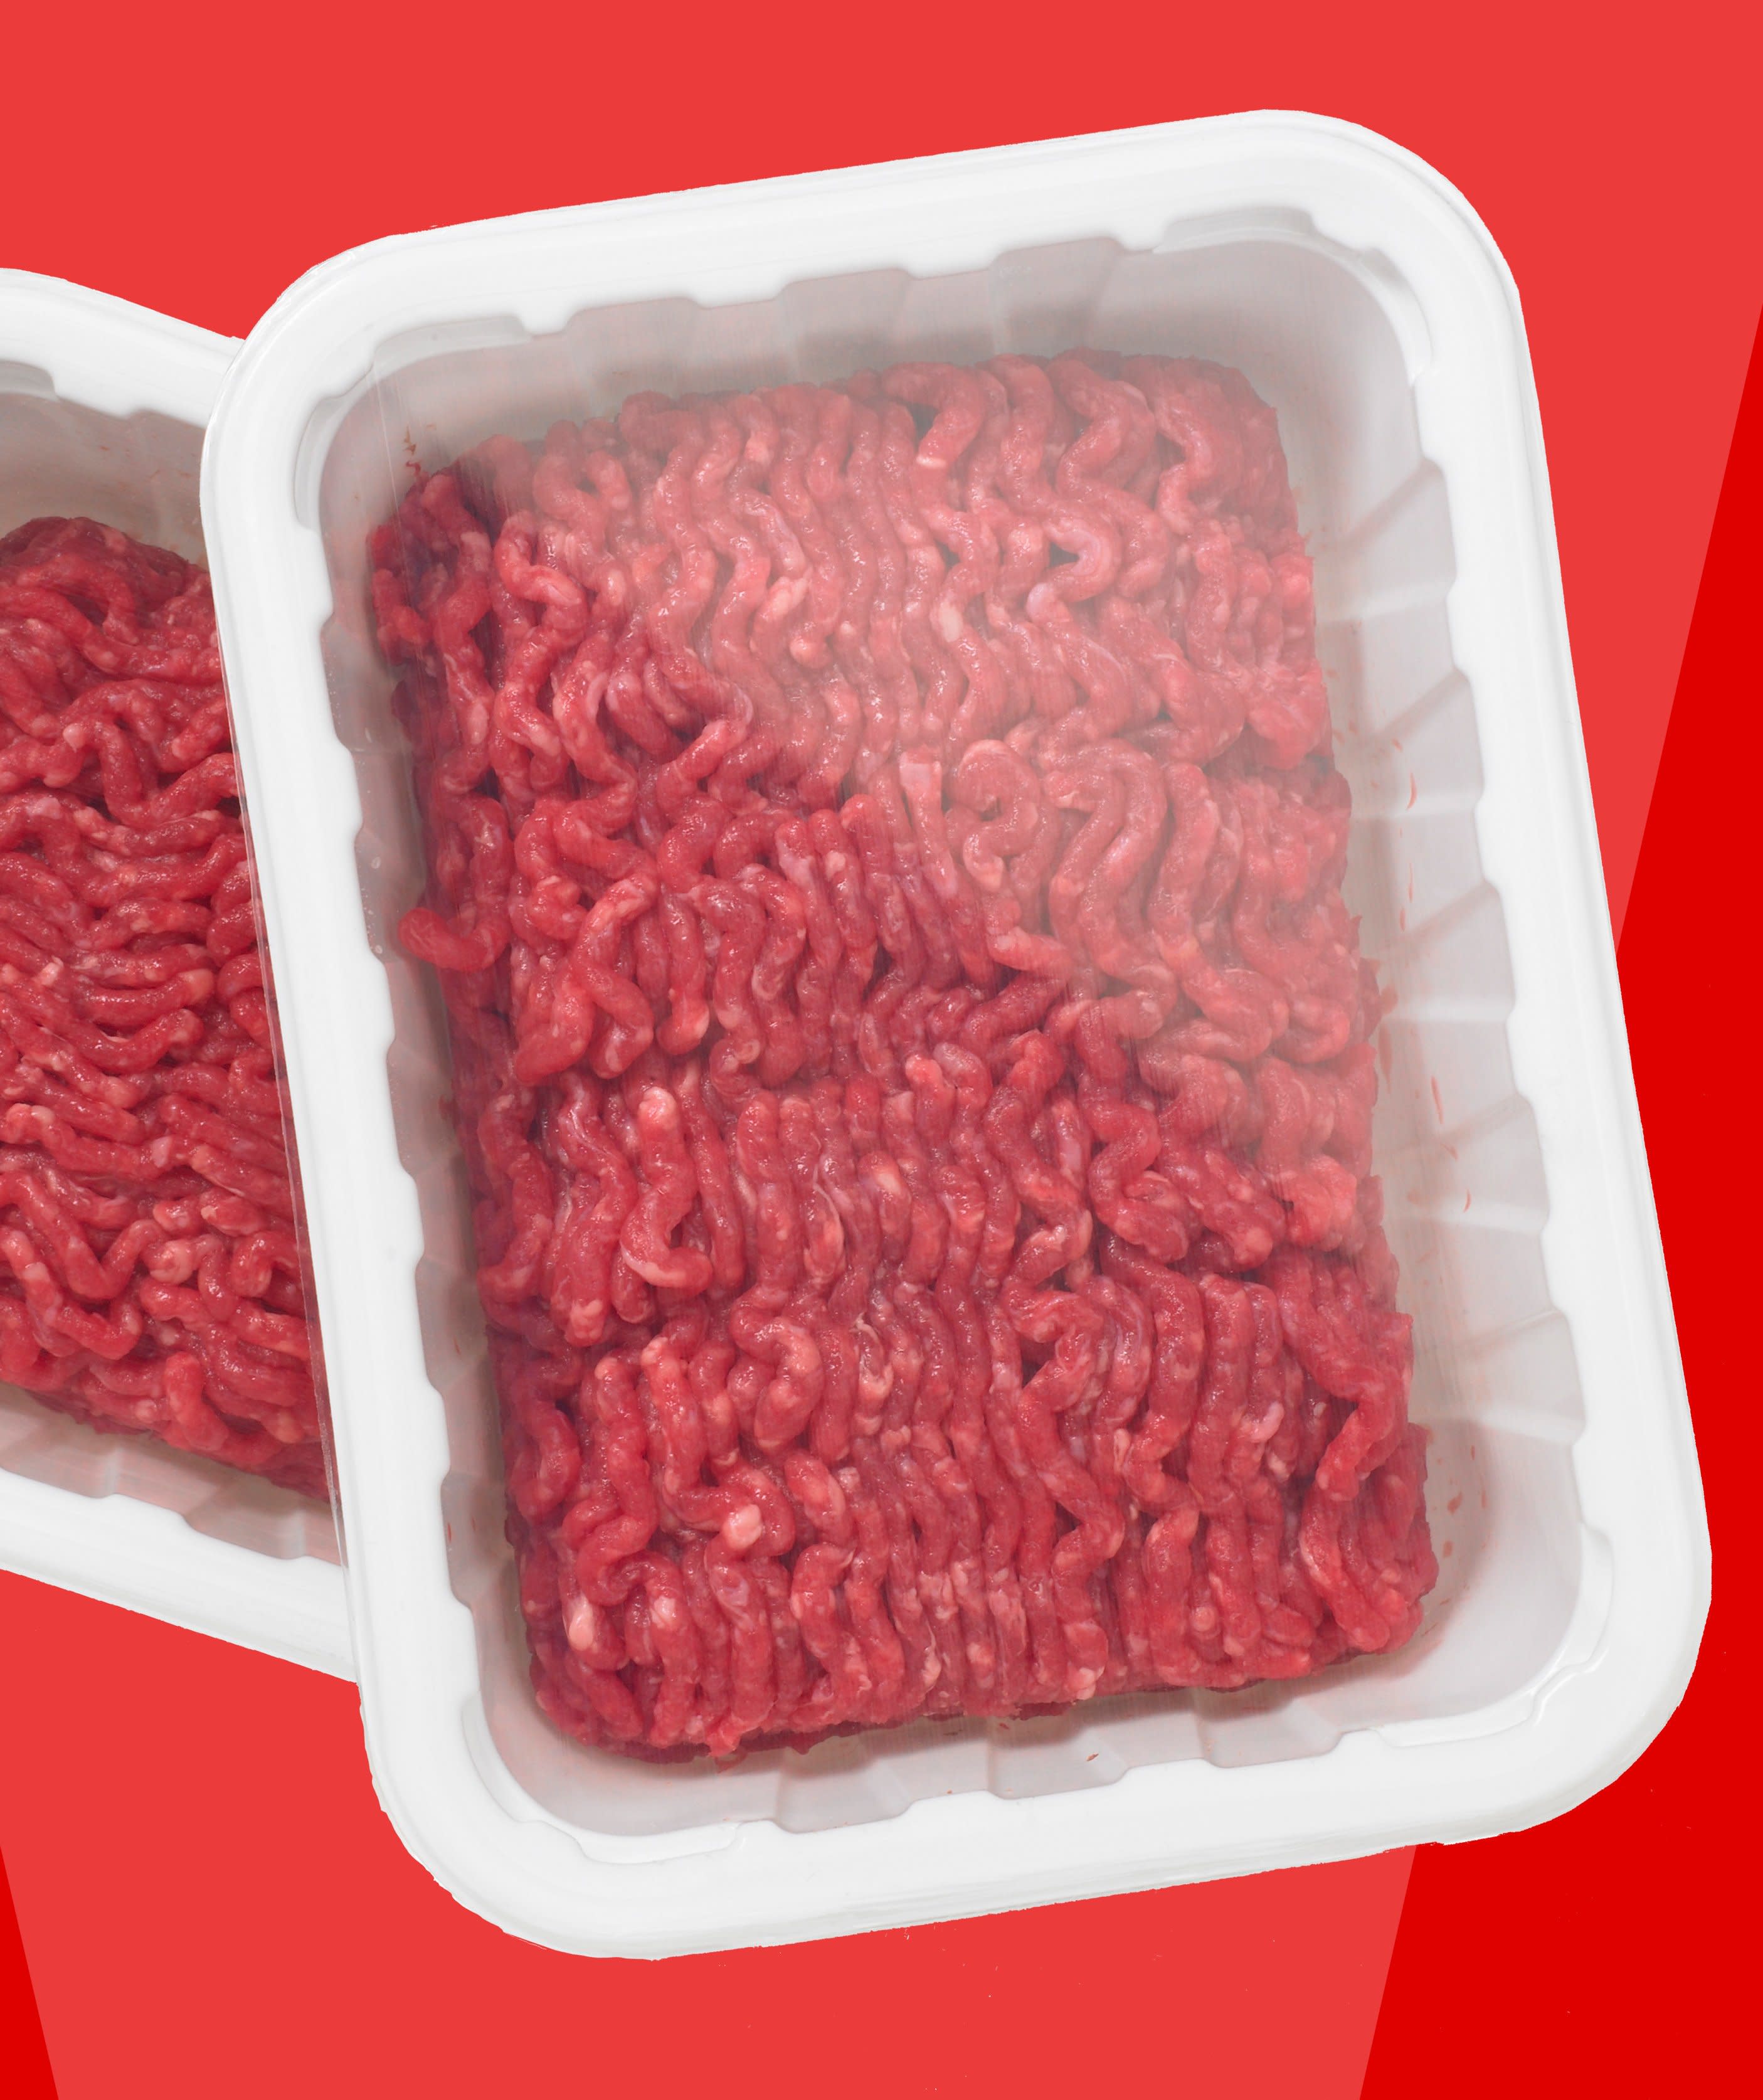 Salmonella Outbreak Linked to Ground Beef Has Sickened 10 and Caused 1